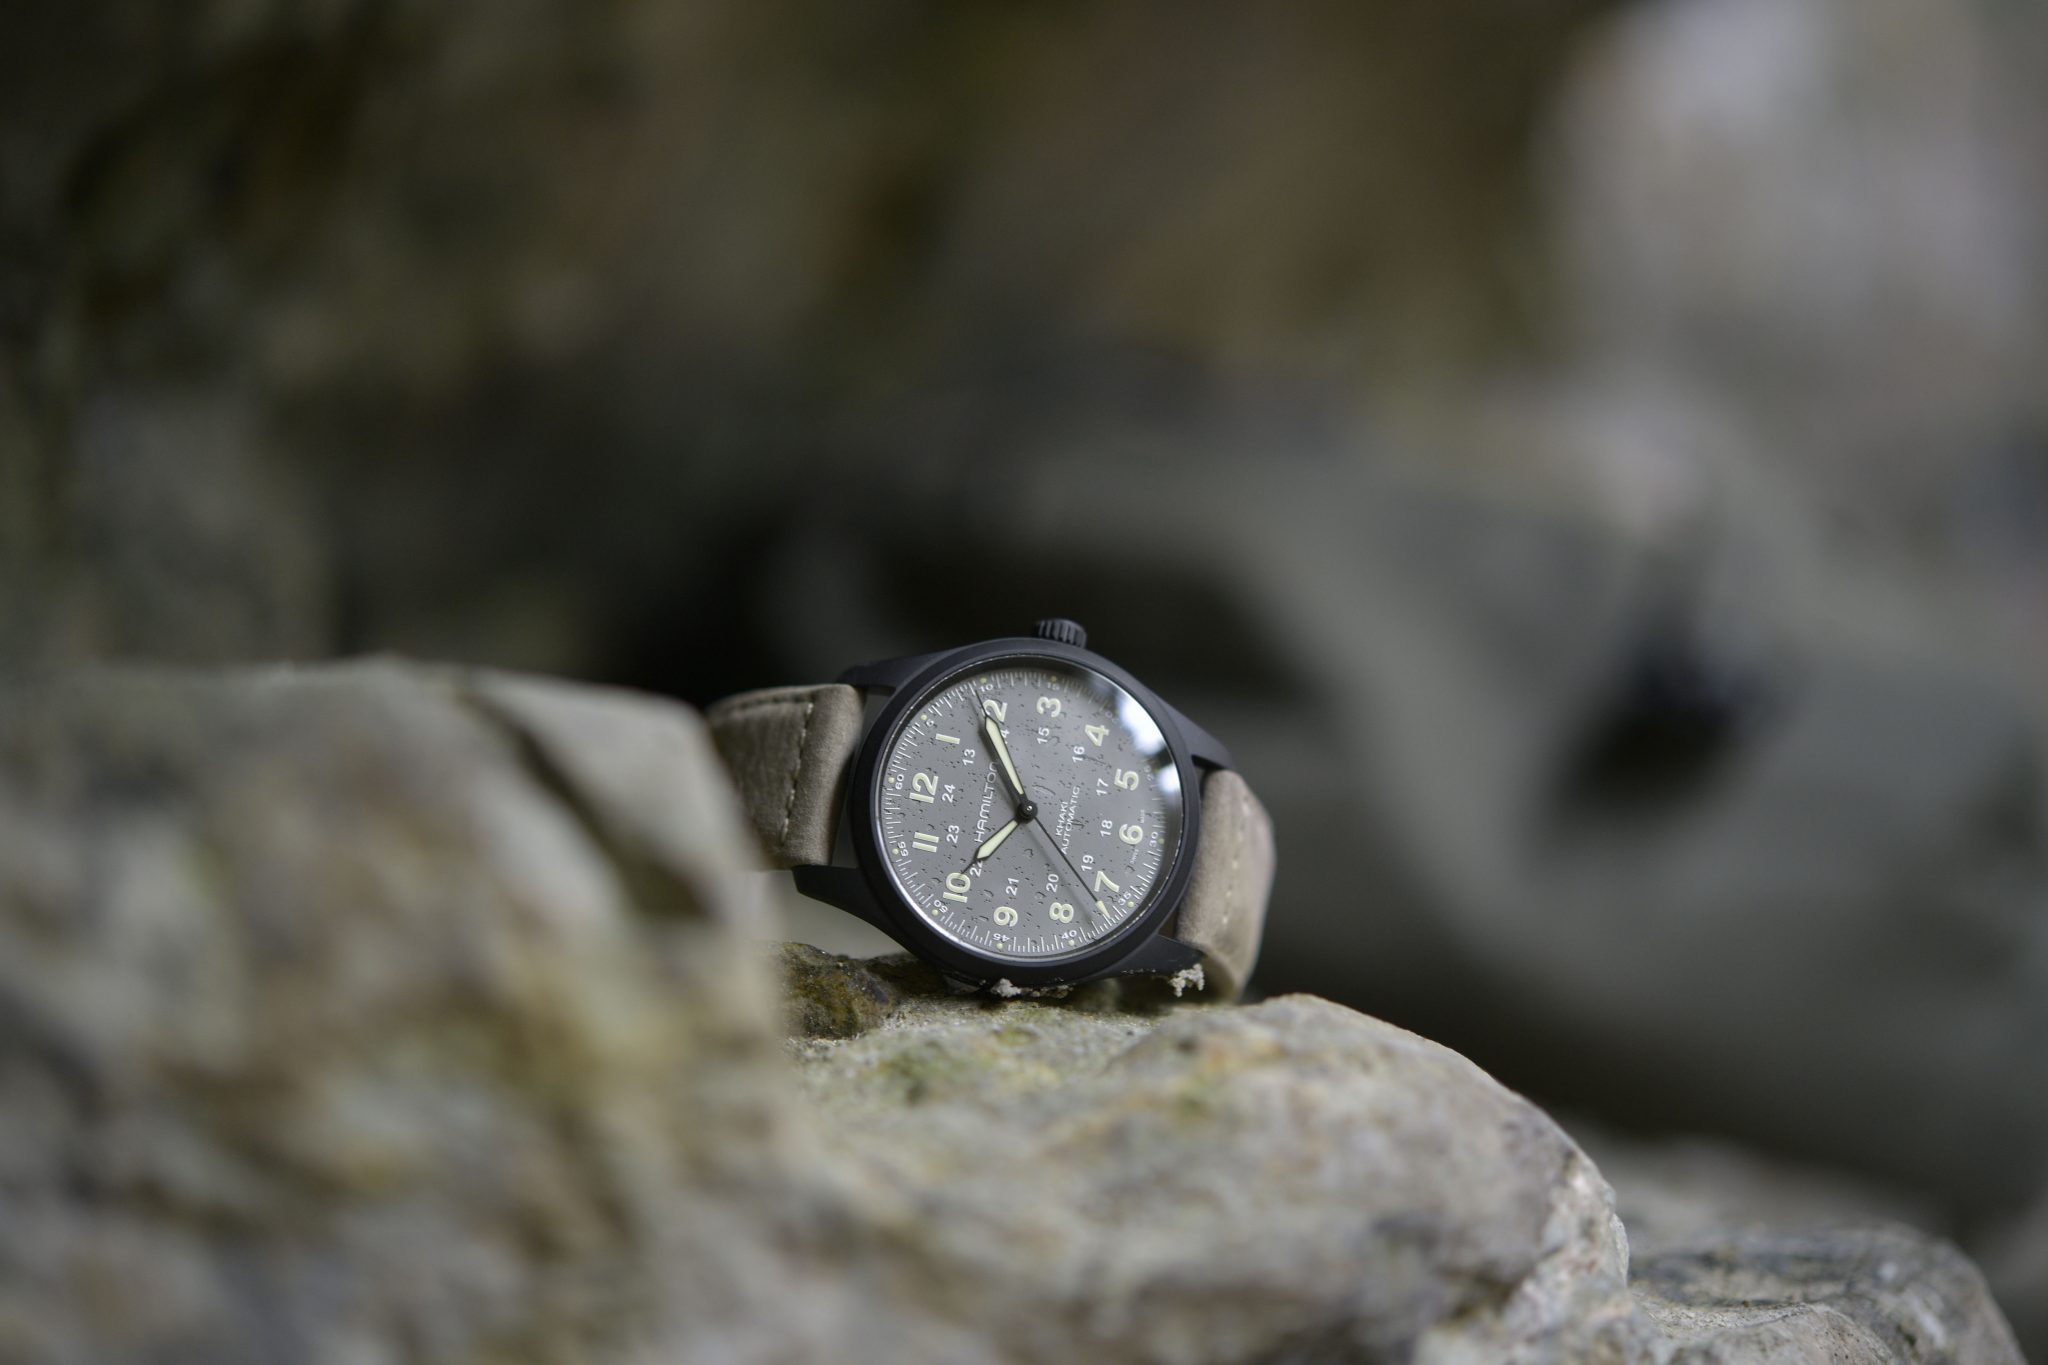 Hamilton shrinks and expands its Field Titanium Automatic collection